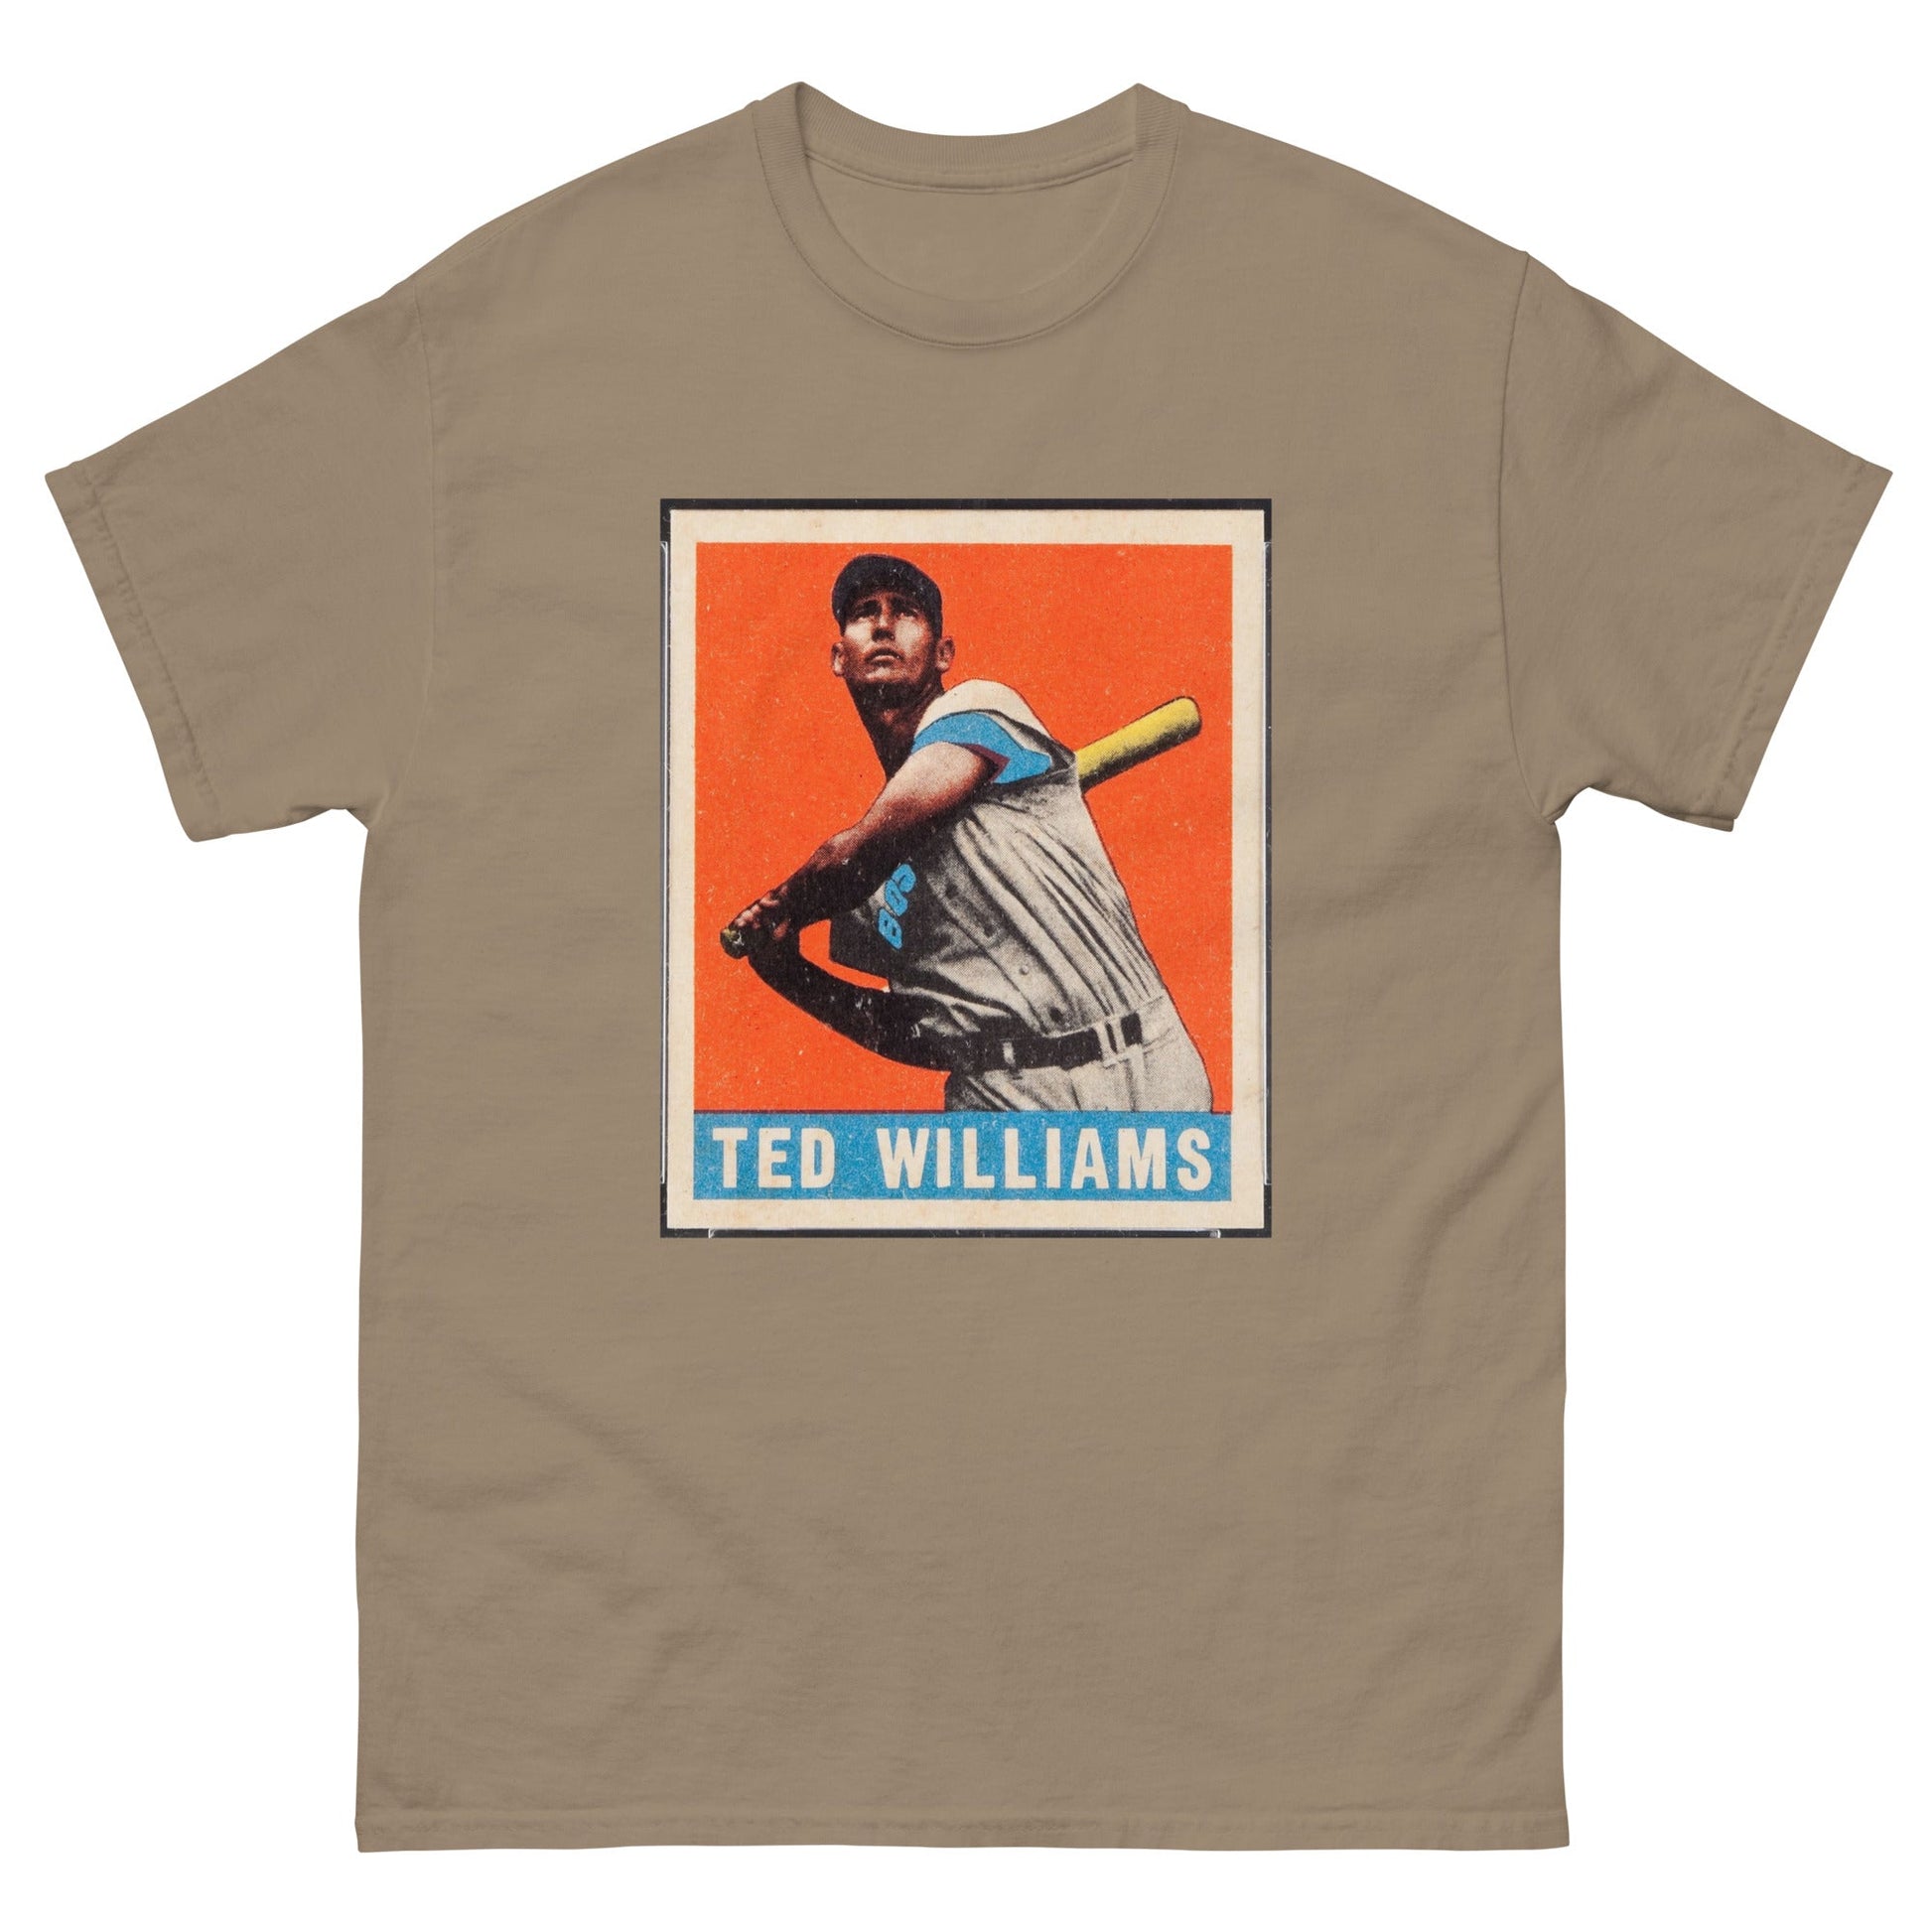 Ted Williams tee - One Small Step History